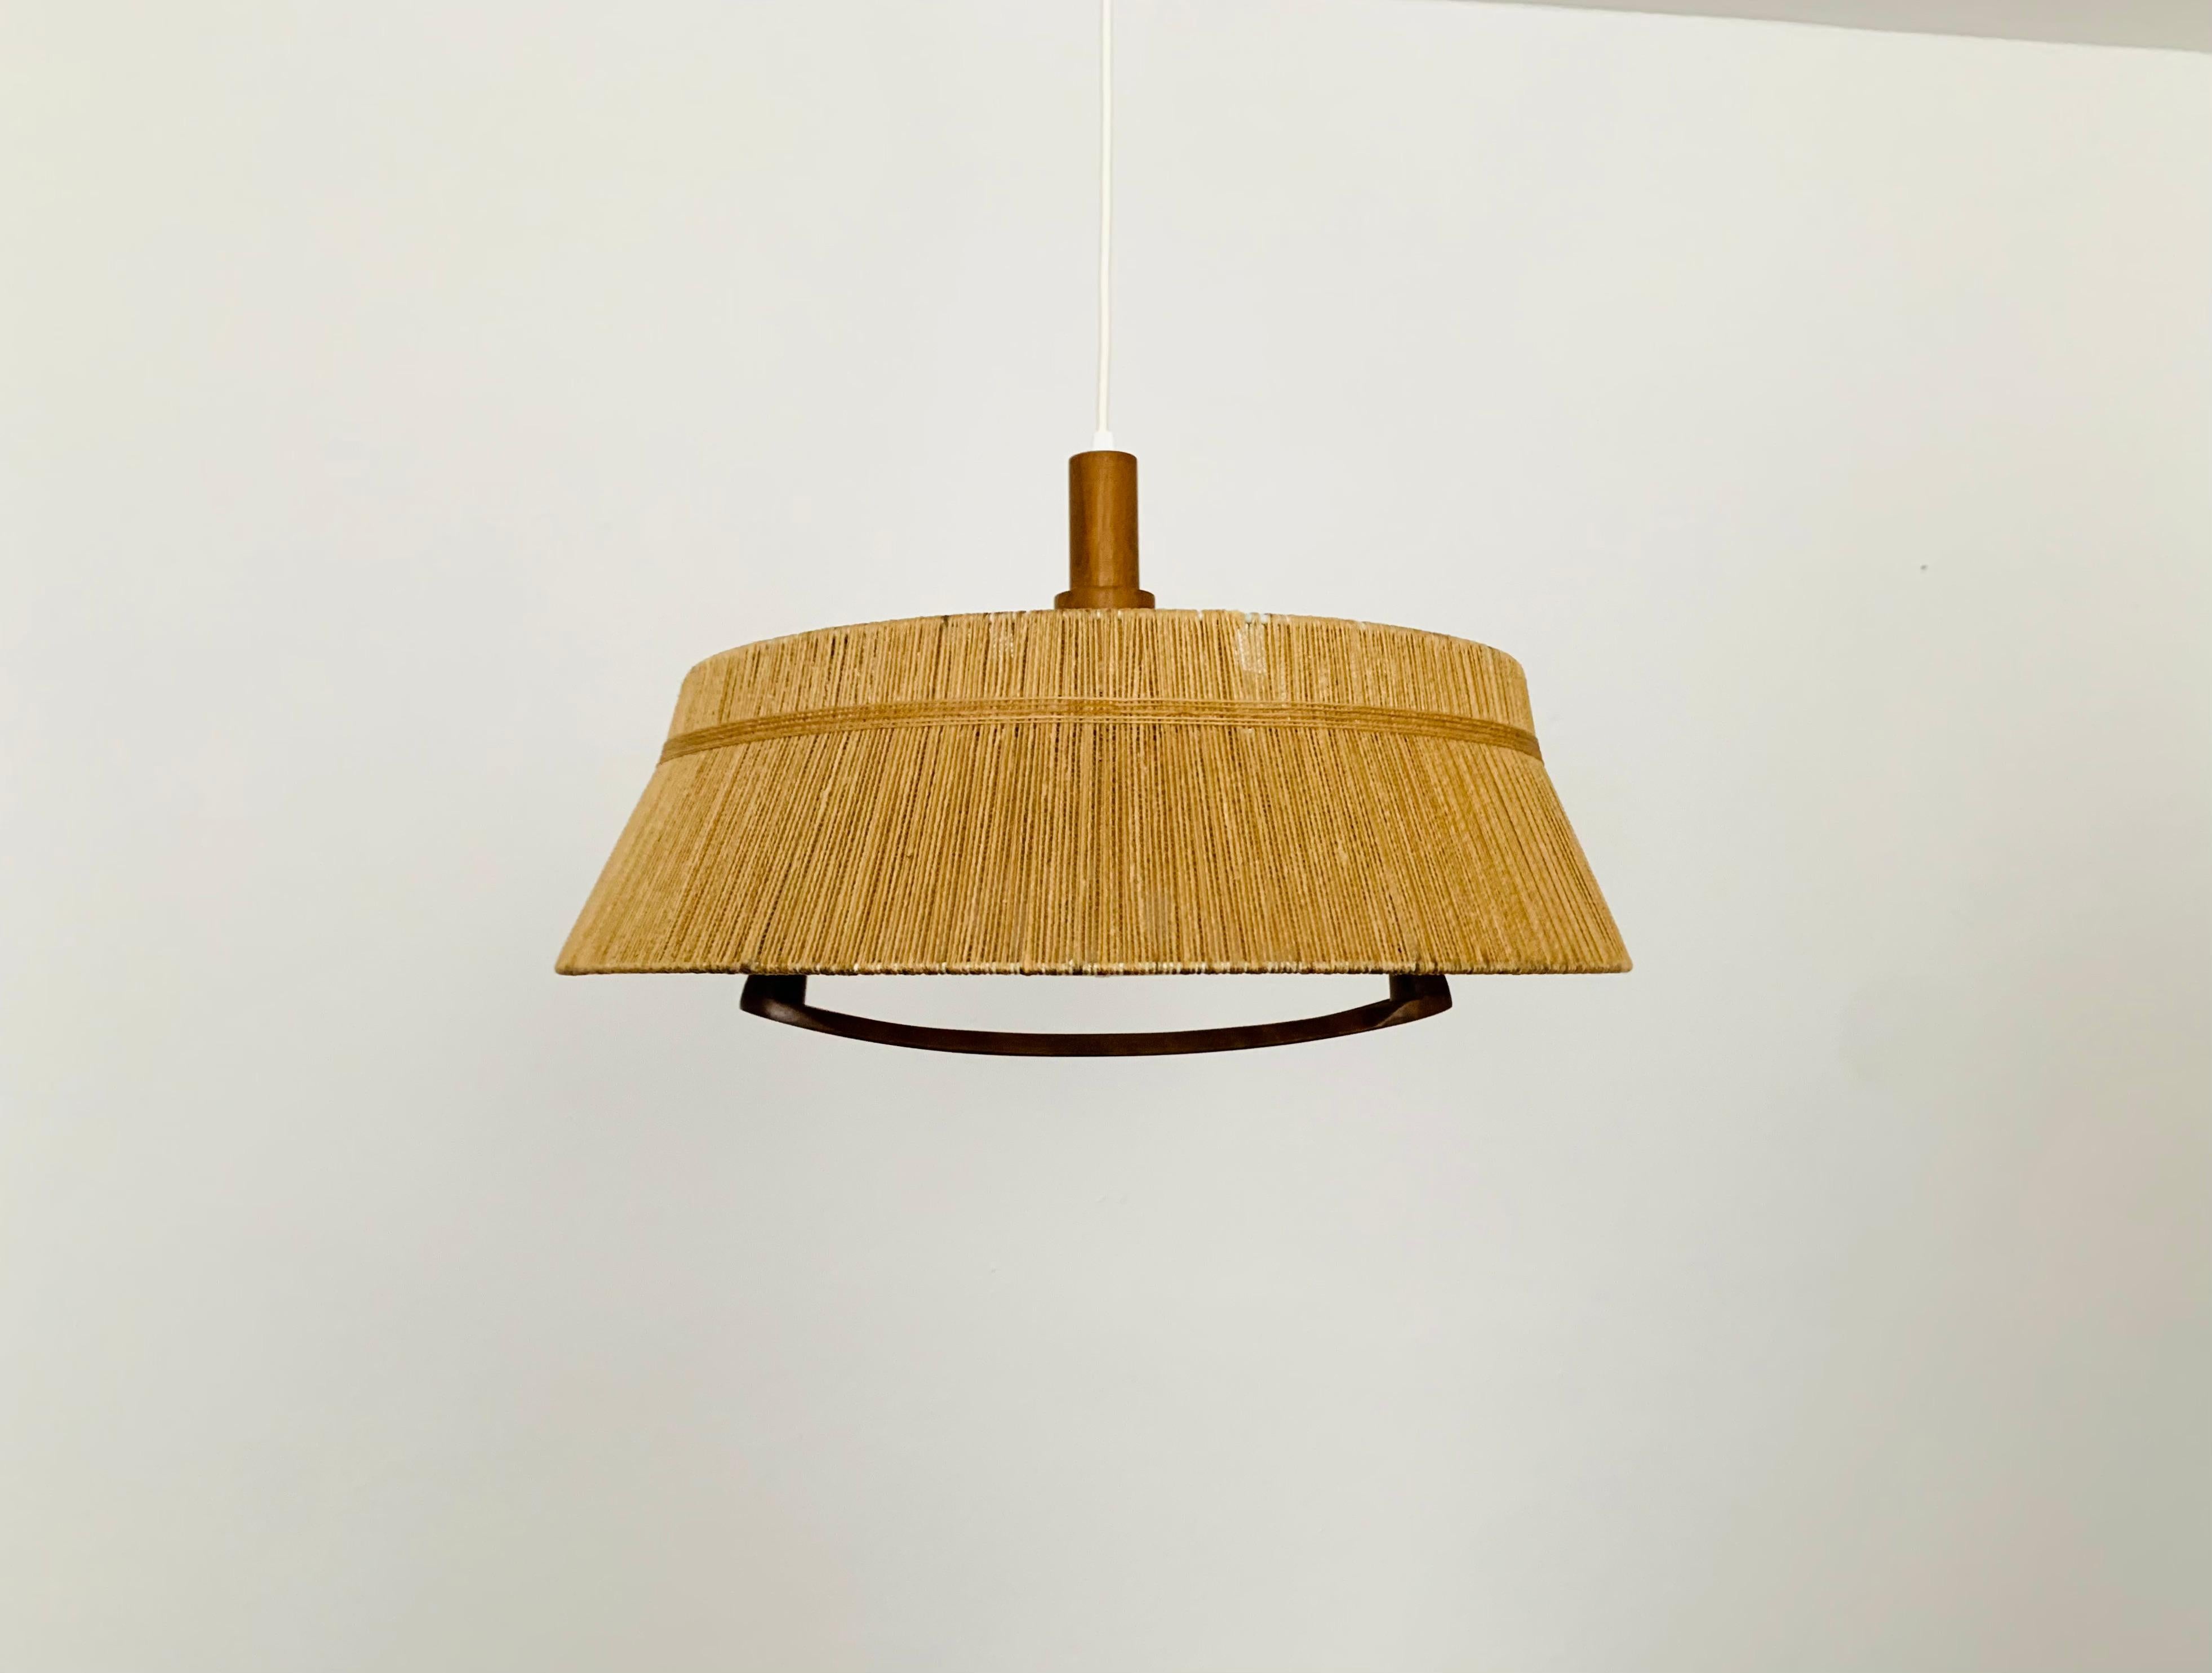 Exceptionally beautiful and large pendant lamp from the 1960s.
The design is very unusual.
The shape and the materials create a warm and very pleasant light.

Manufacturer: Temde

Condition:

Very good vintage condition with slight signs of wear